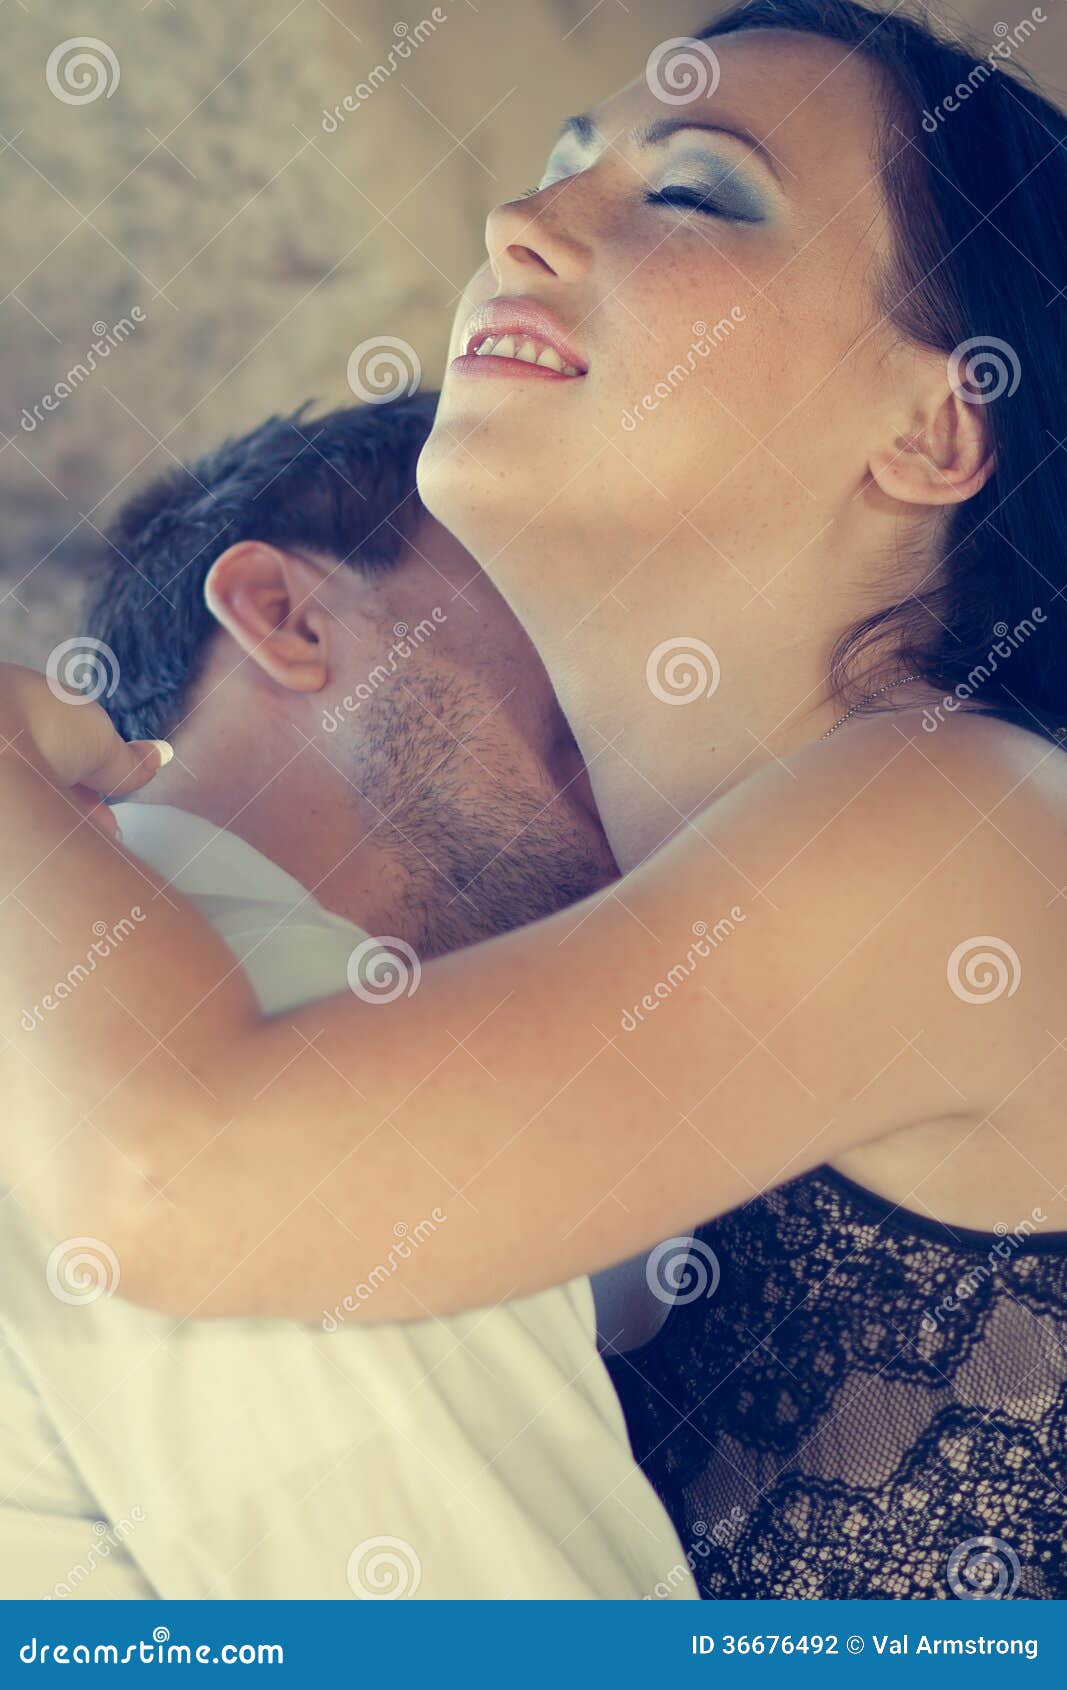 beautiful couple being intimate